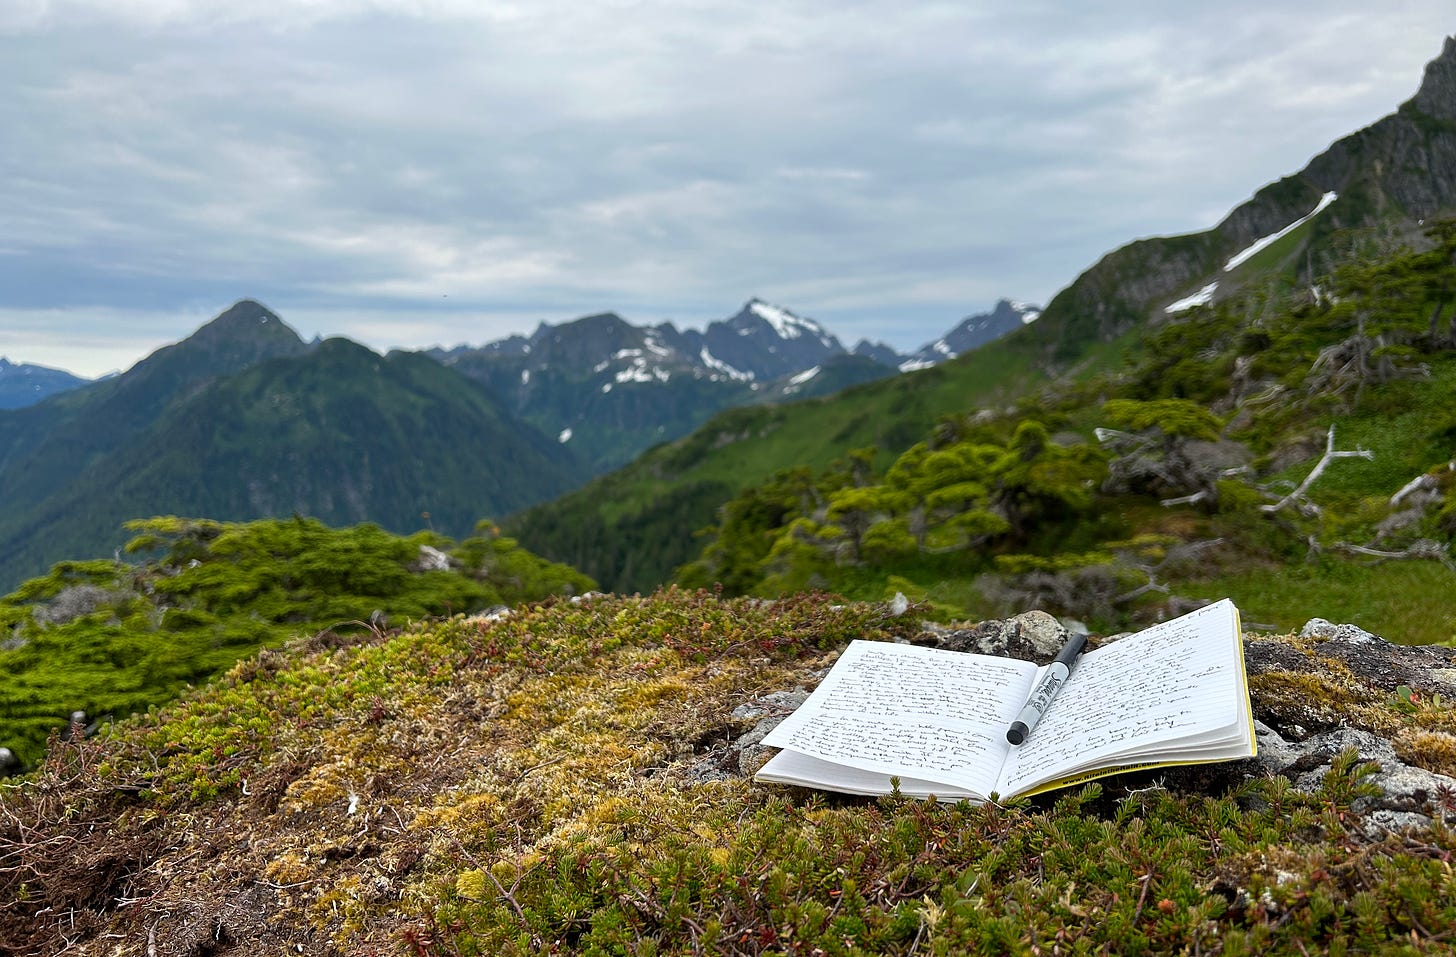 Journal open with a pen and some writing, on a mountain ridge.